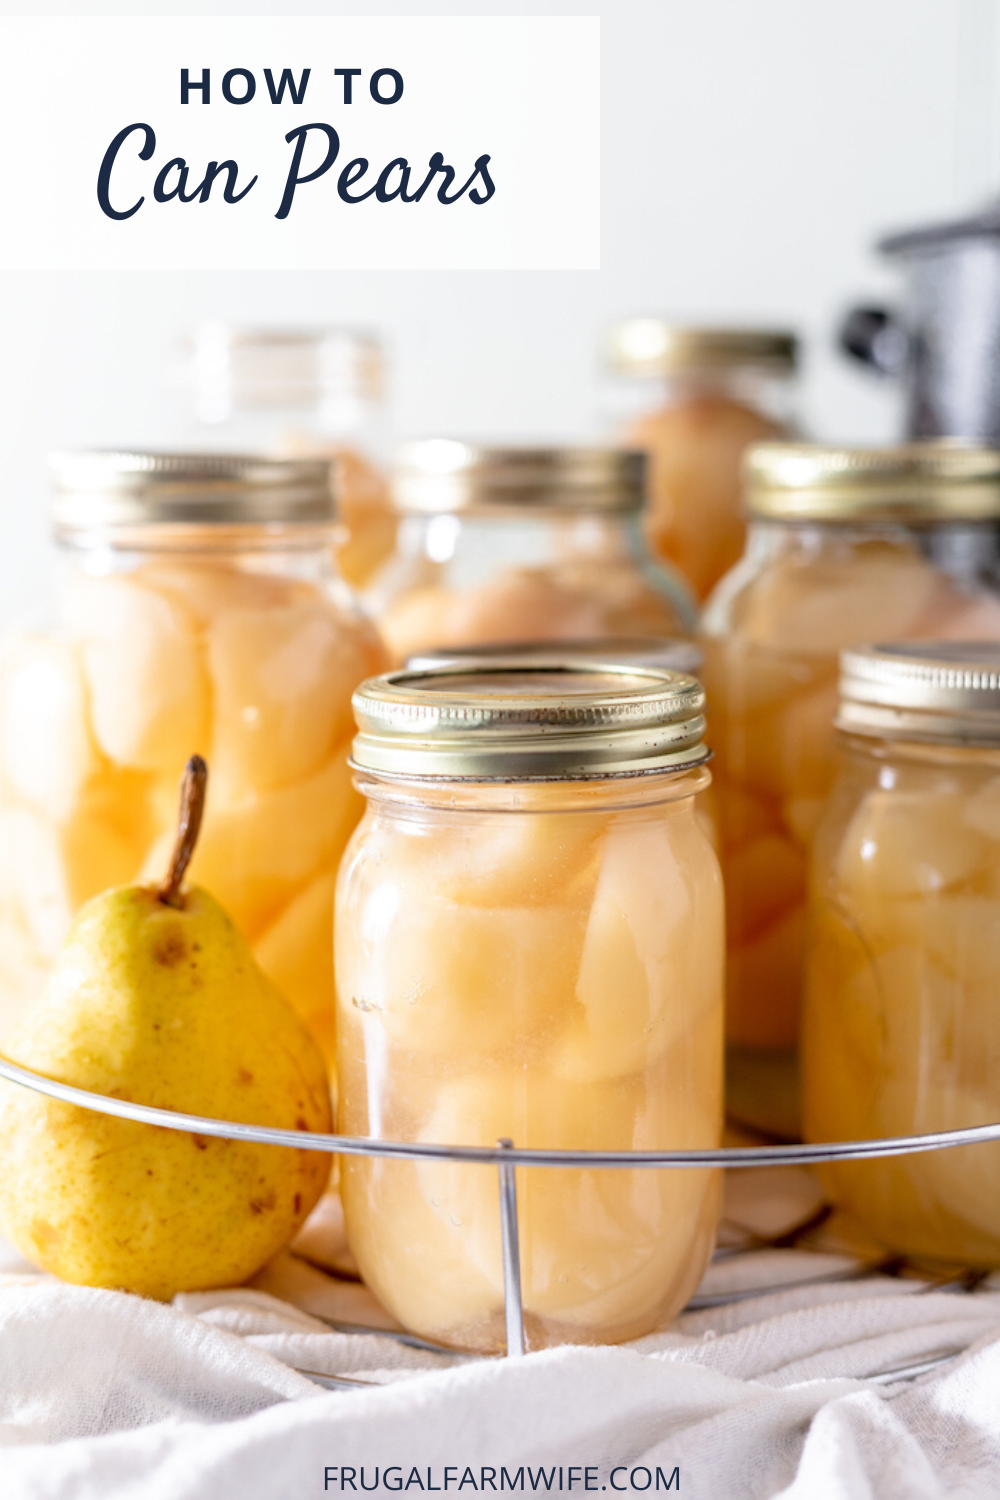 Image shows several mason jars full of sliced pears in juice on a wire rack. Next to the front jar sits a fresh pear. Above the image text reads "How to Can Pears"